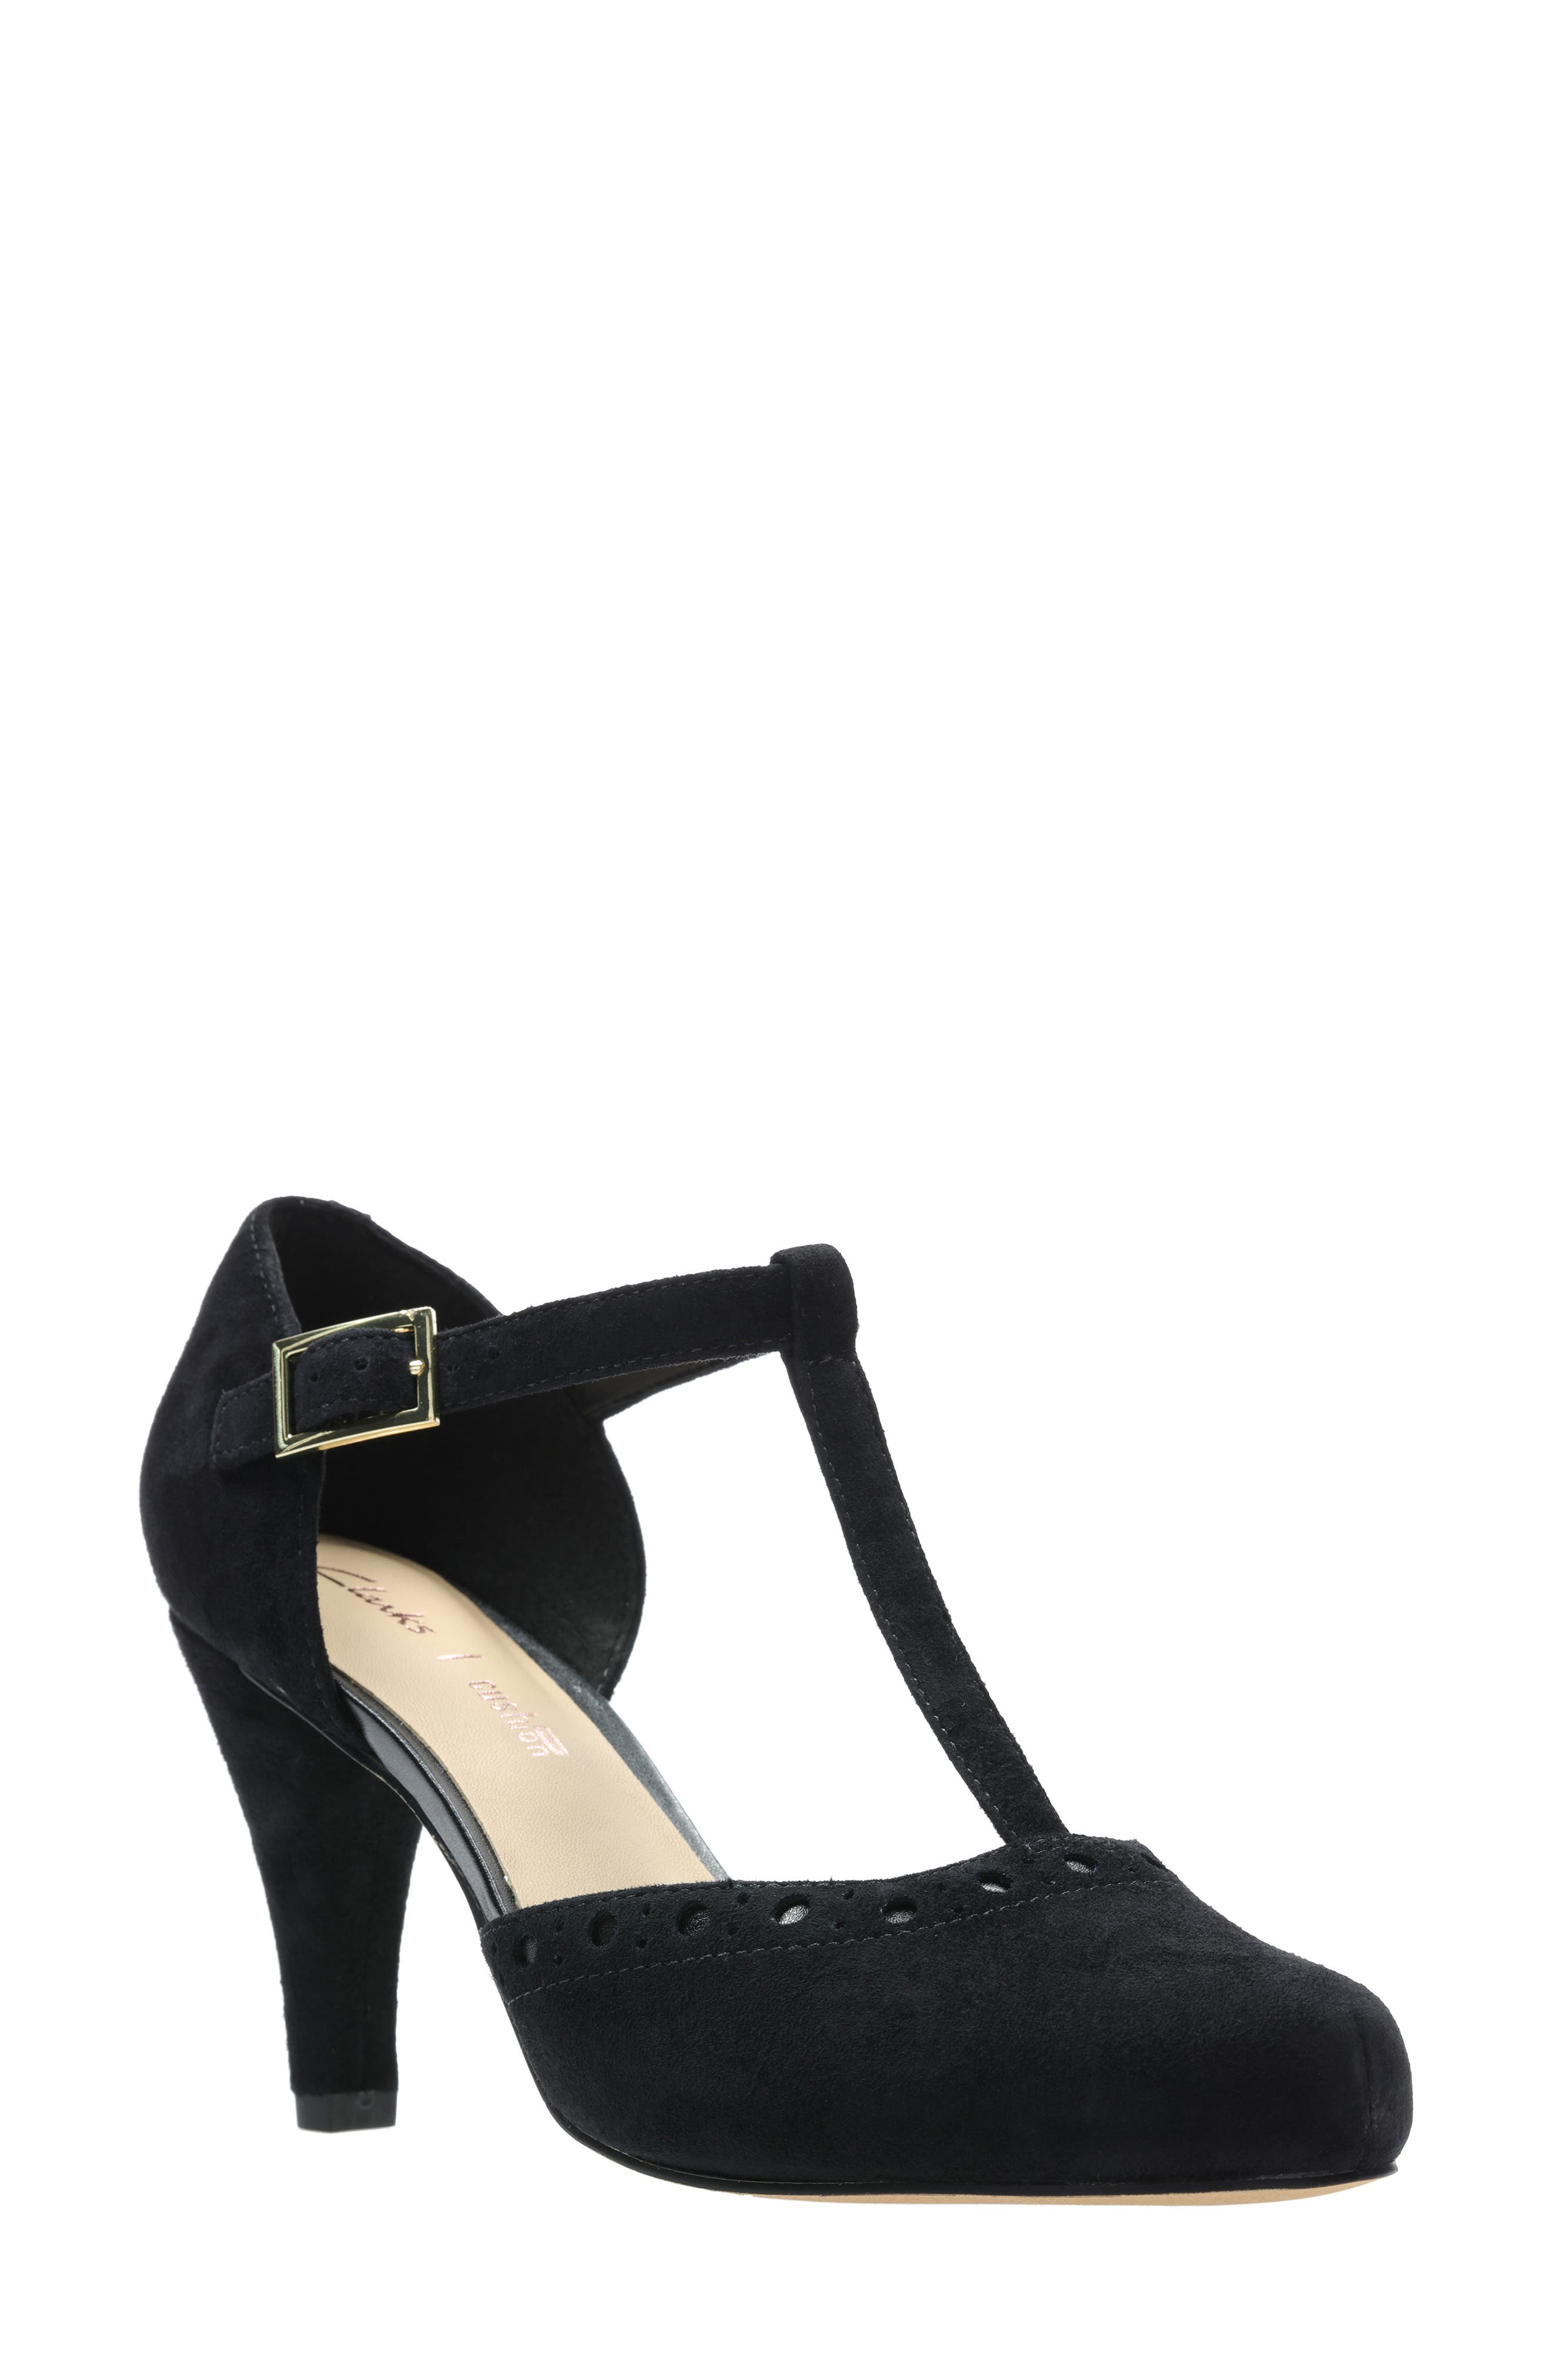 clarks heels with strap